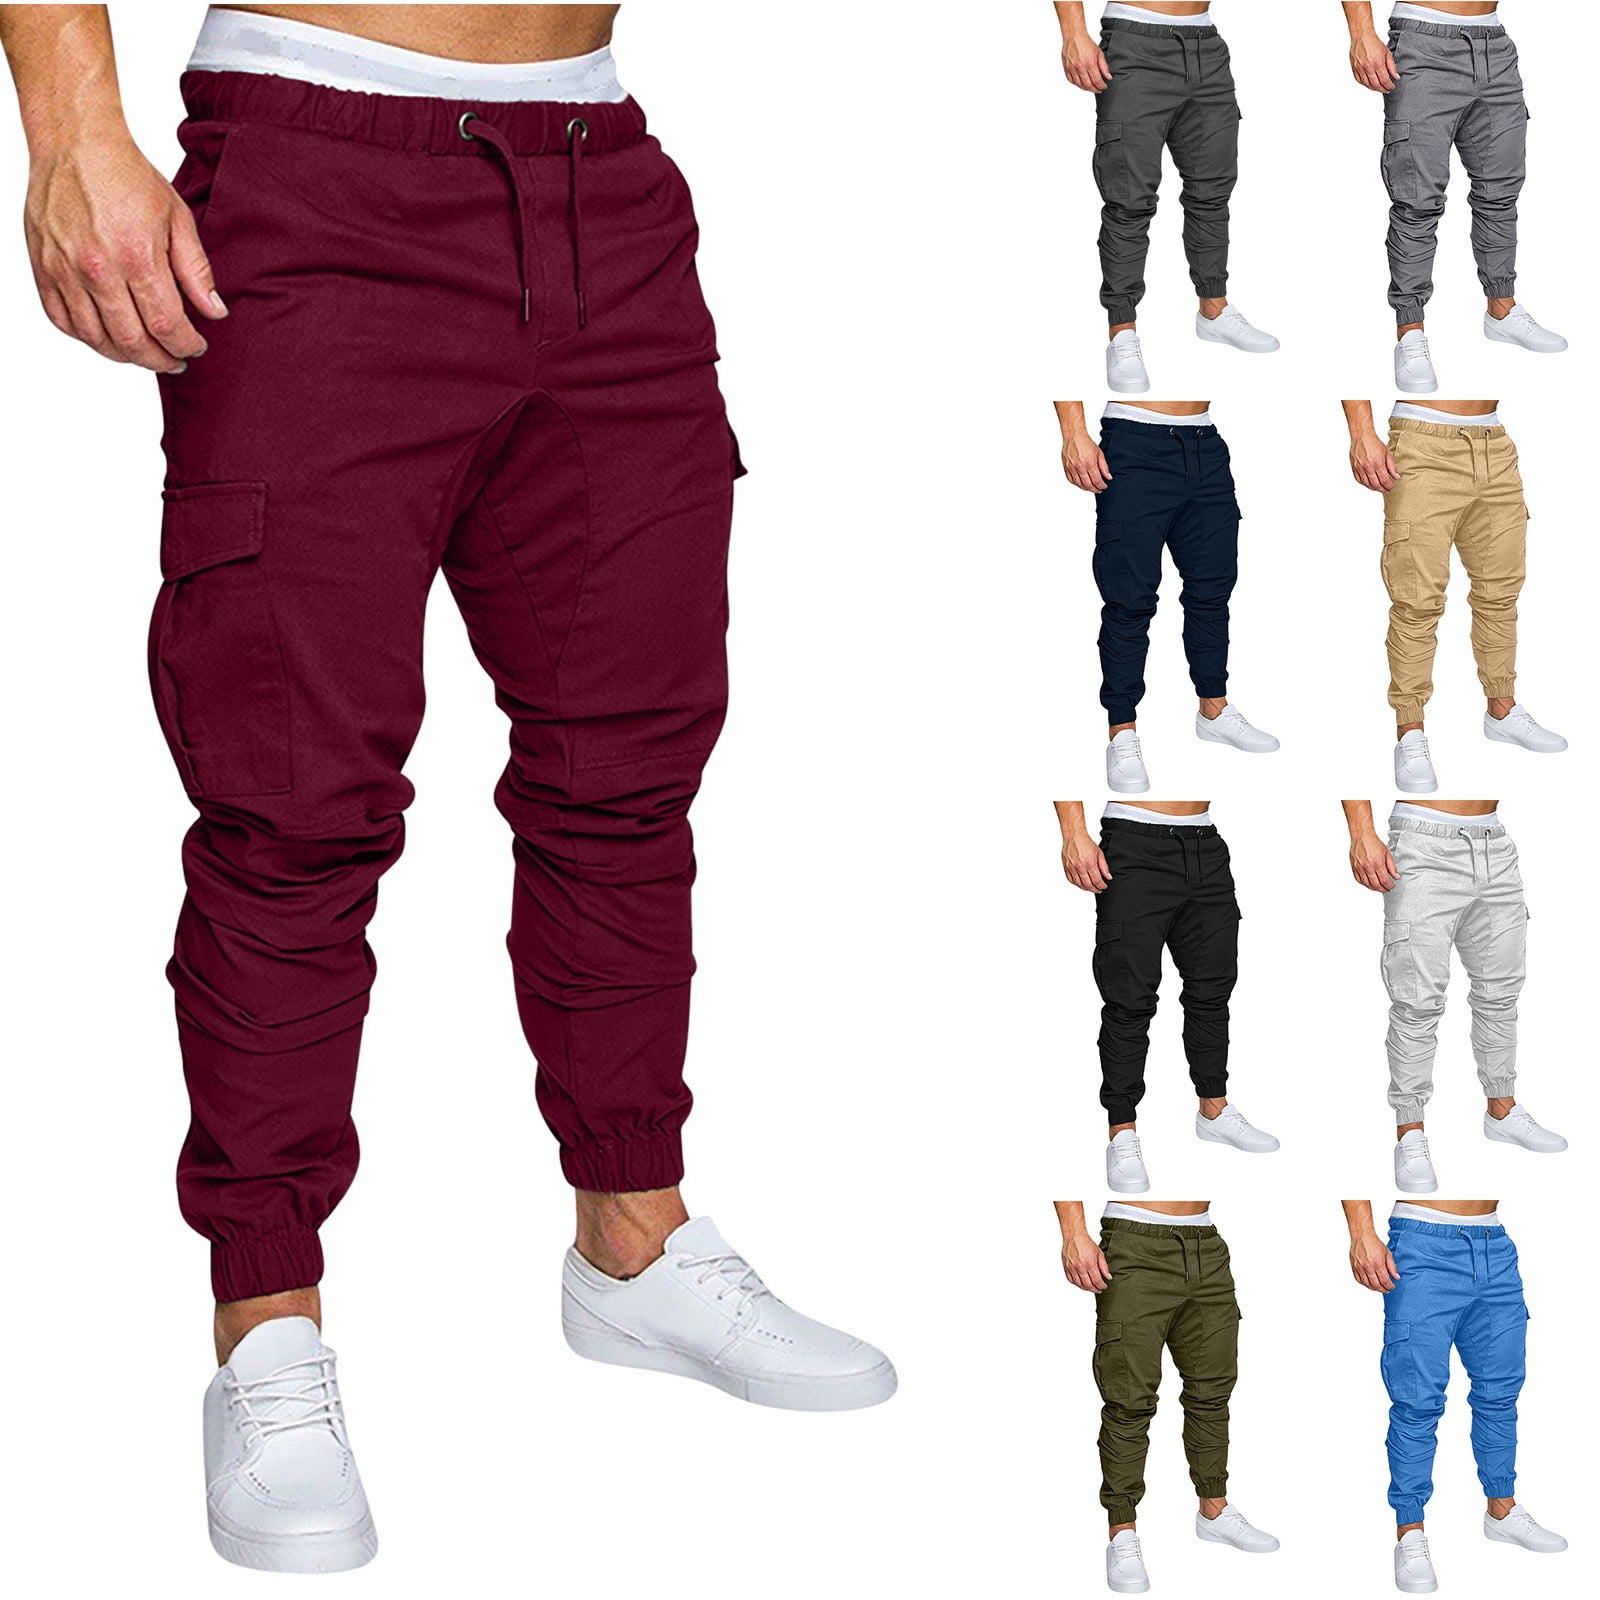 Symoid Men Pants Cargo Christmas Gift Fall and Winter Athletic Men